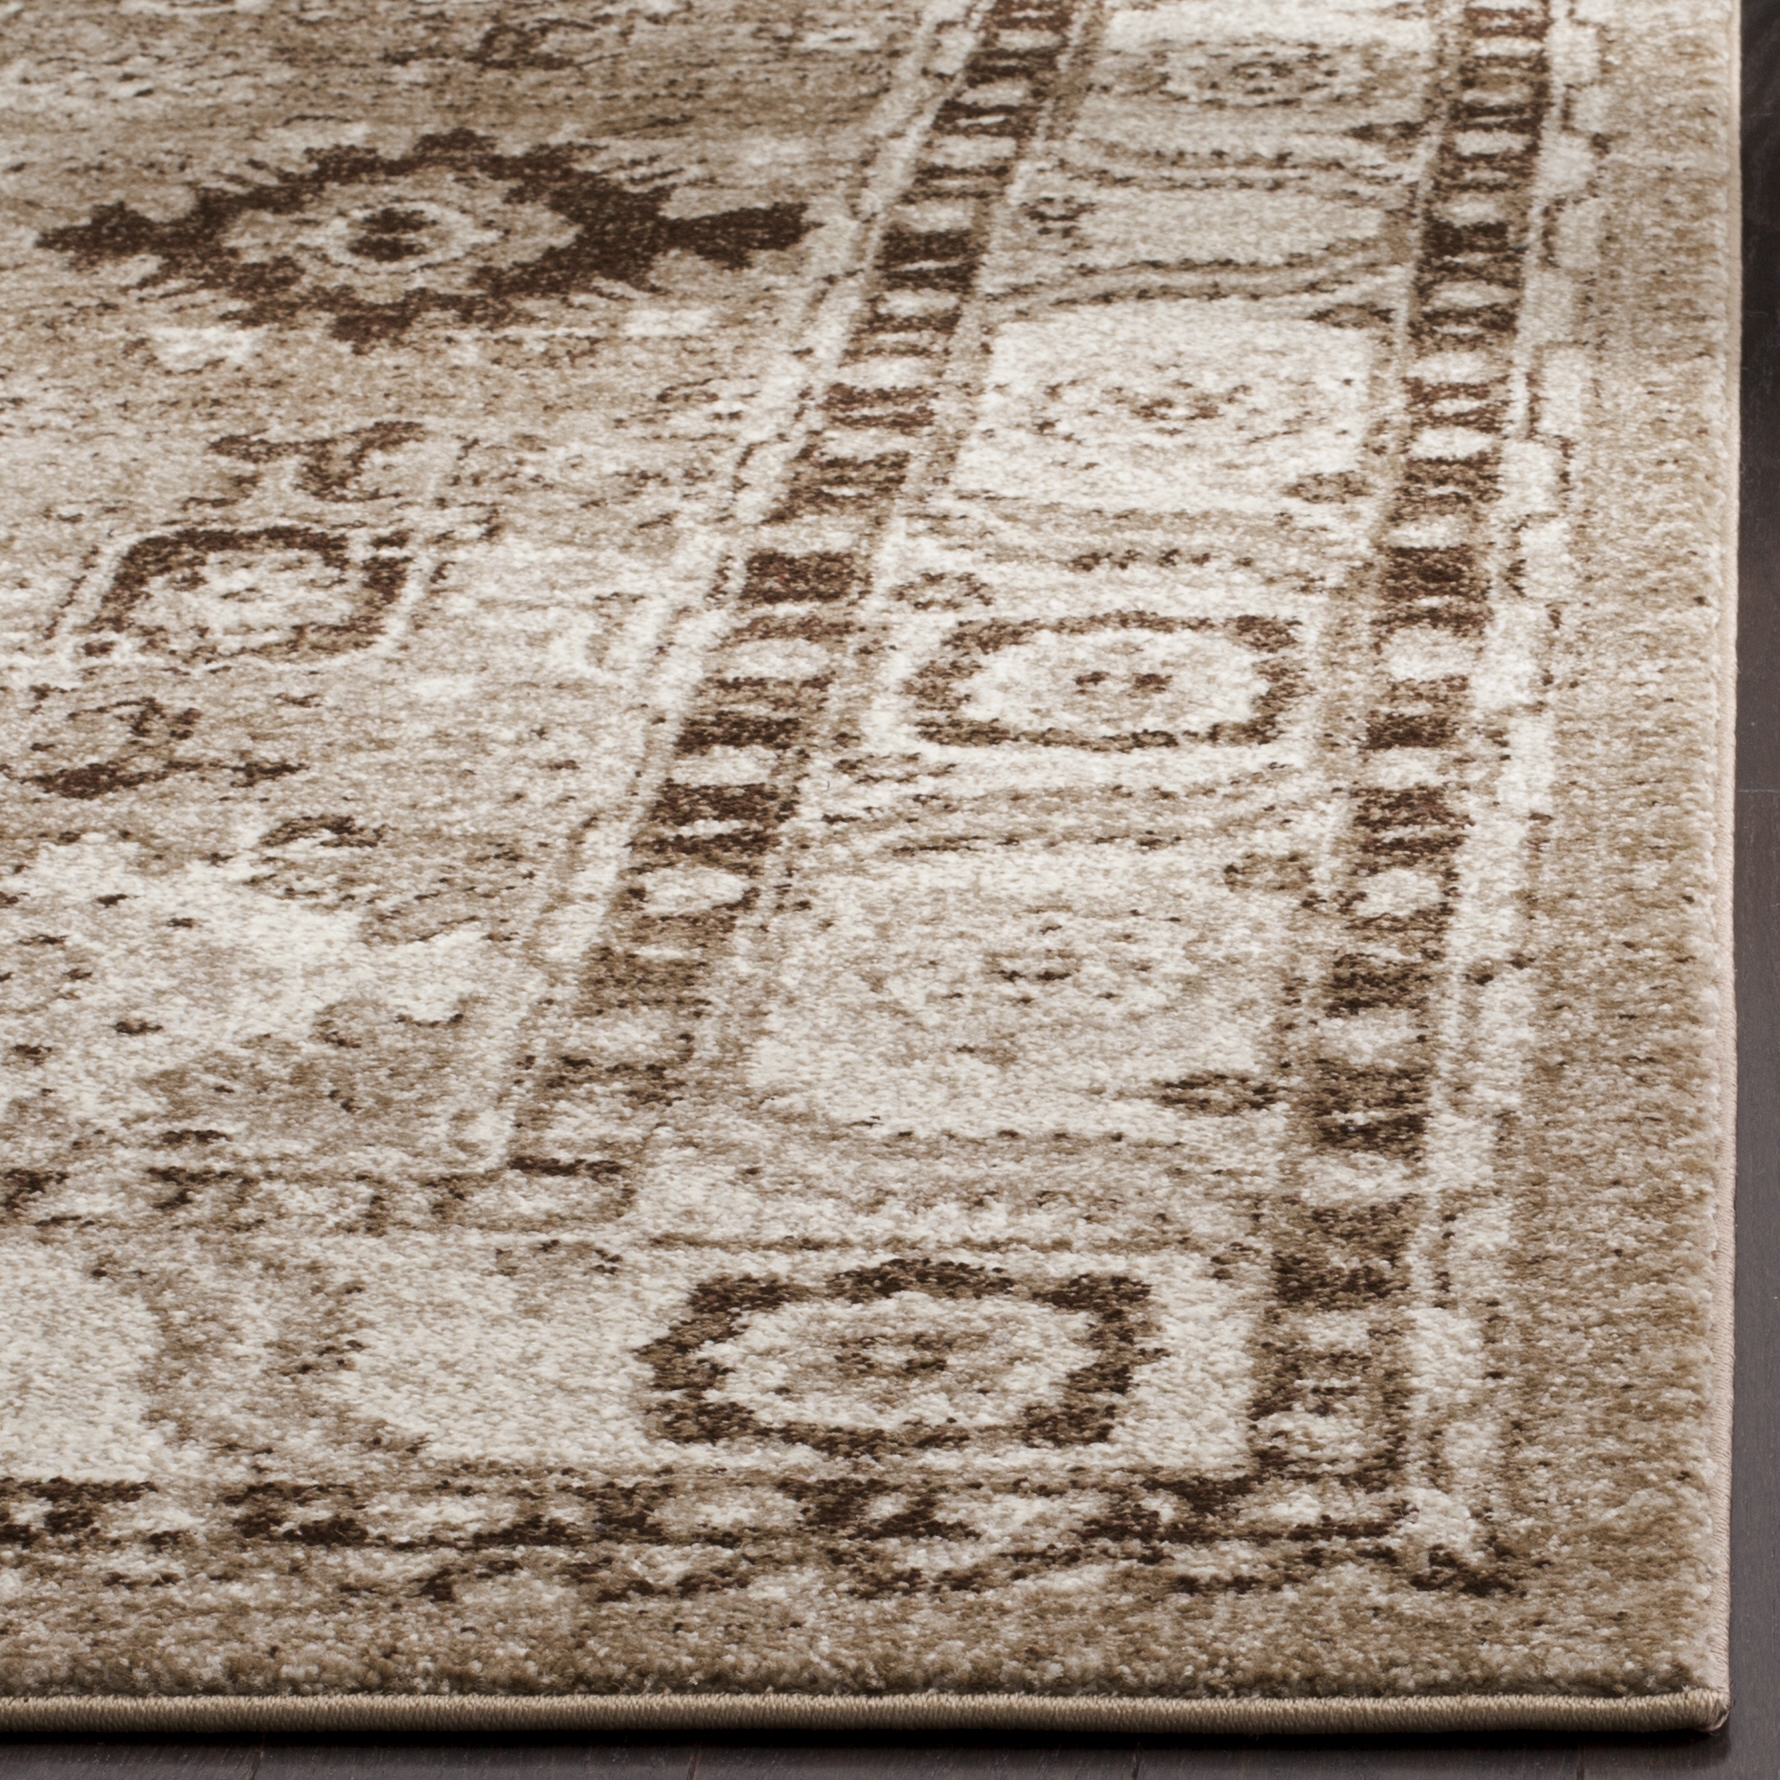 Arlo Home Woven Area Rug, VTH214T, Taupe,  5' 3" X 7' 6" - Image 2